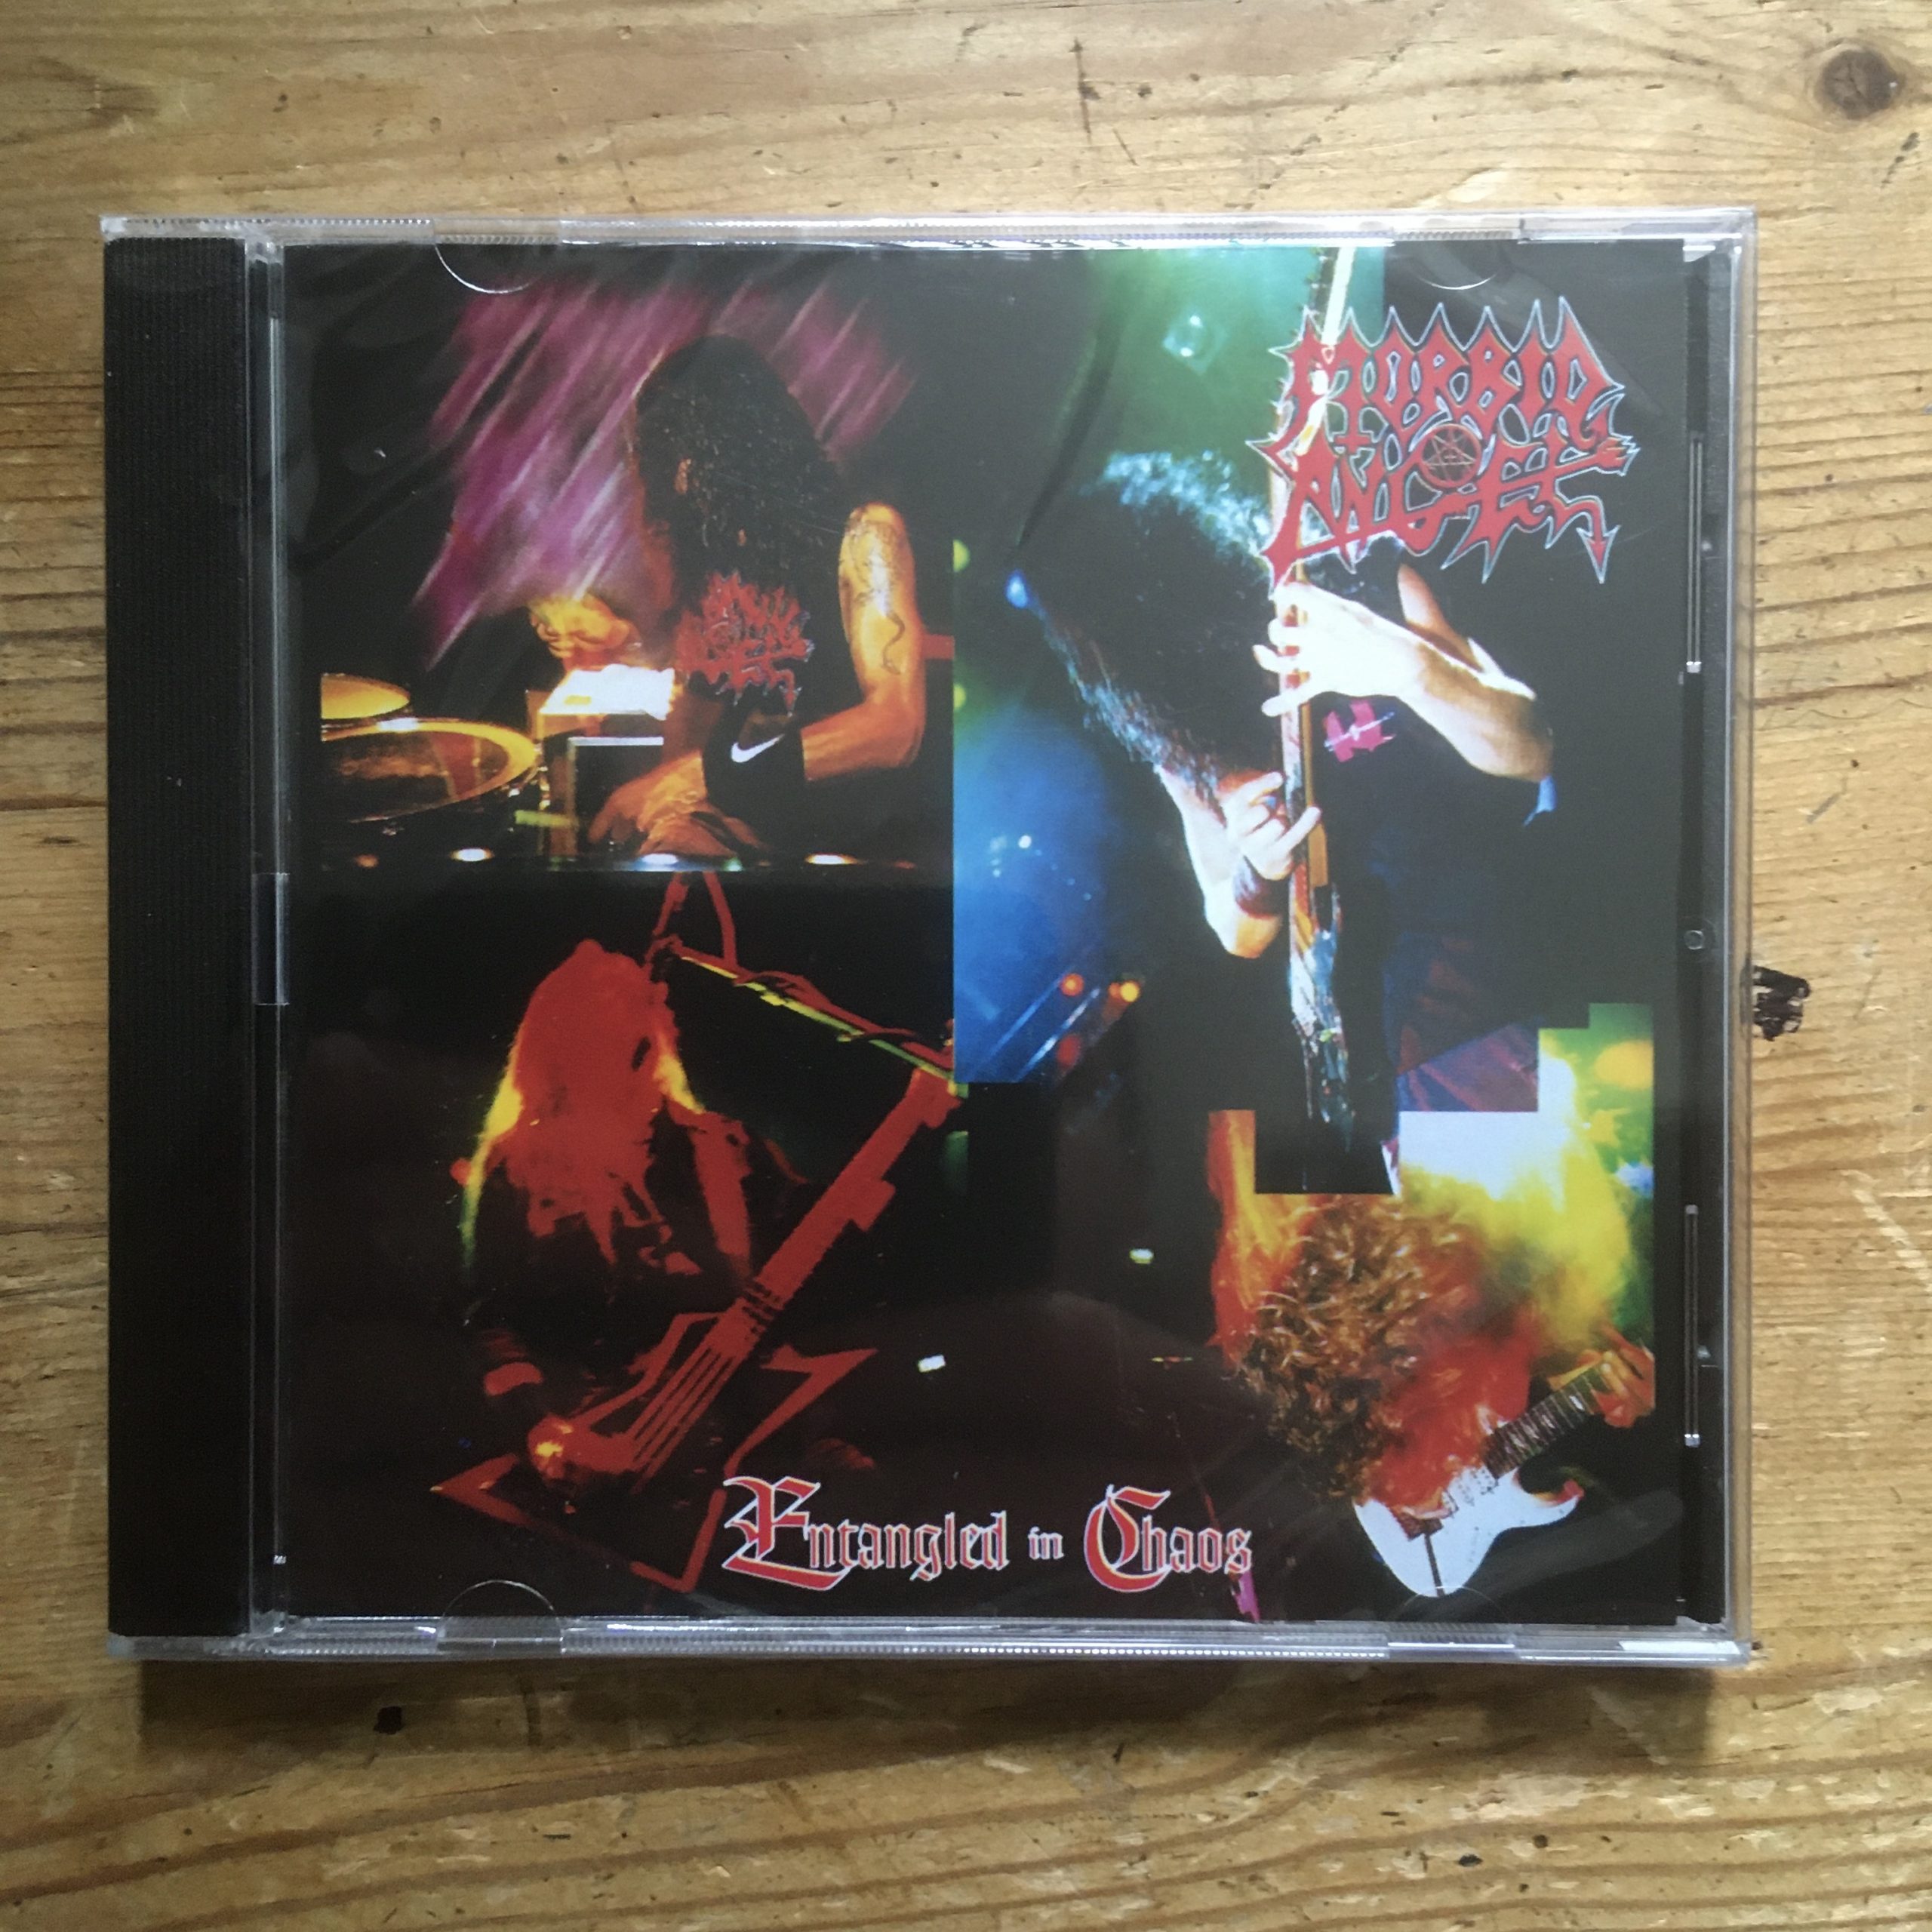 Photo of the Morbid Angel - "Entangled in Chaos" CD